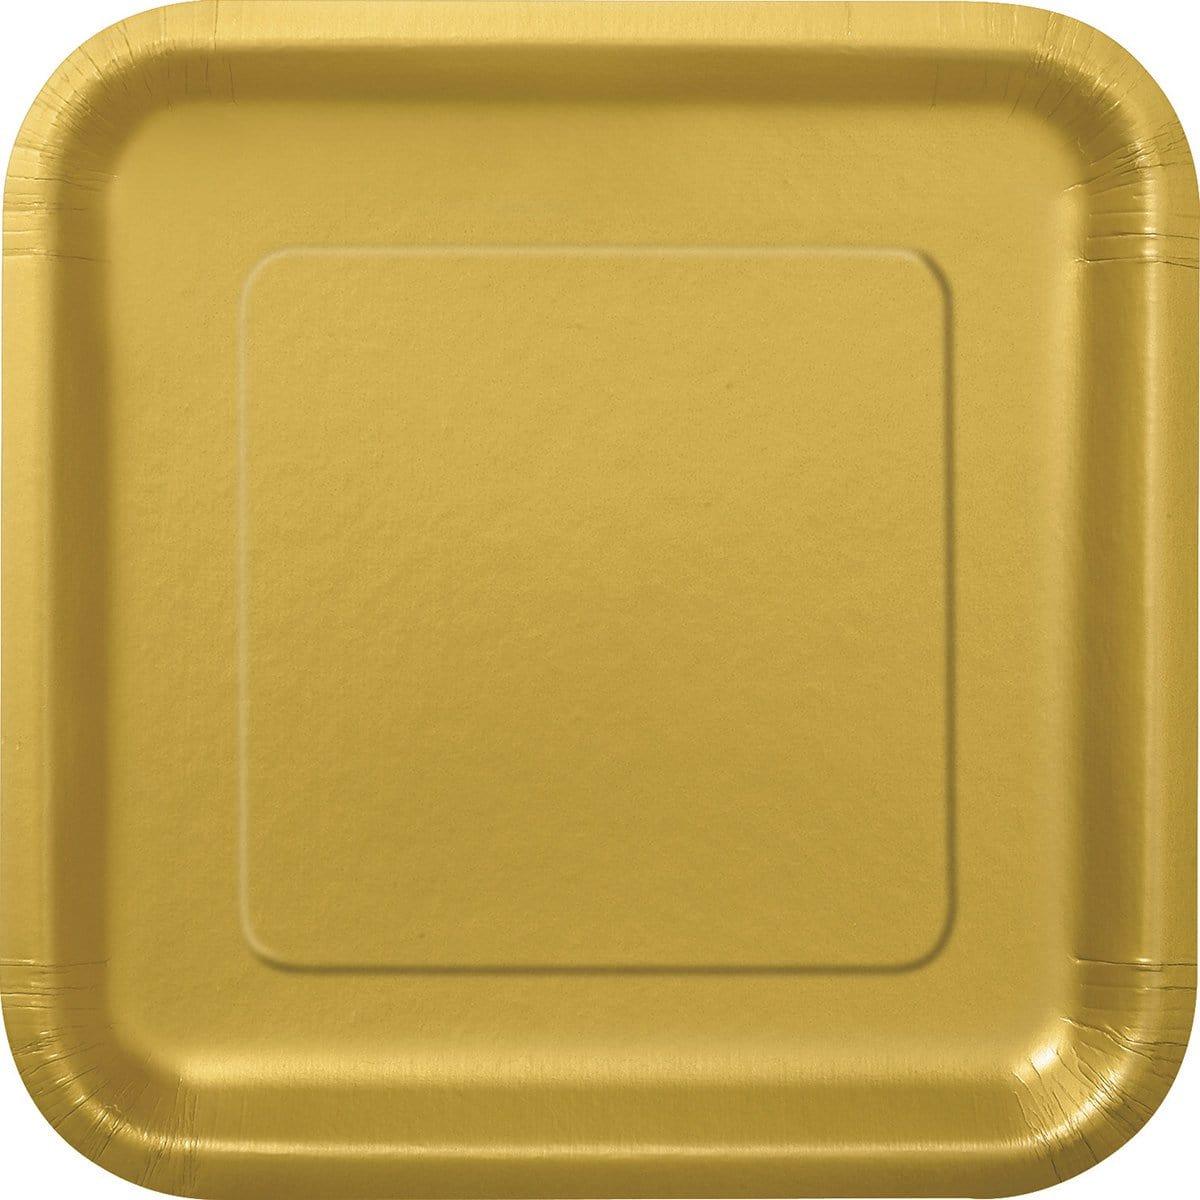 Buy Plasticware Square Paper Plates 7 In. - Gold 16/pkg. sold at Party Expert